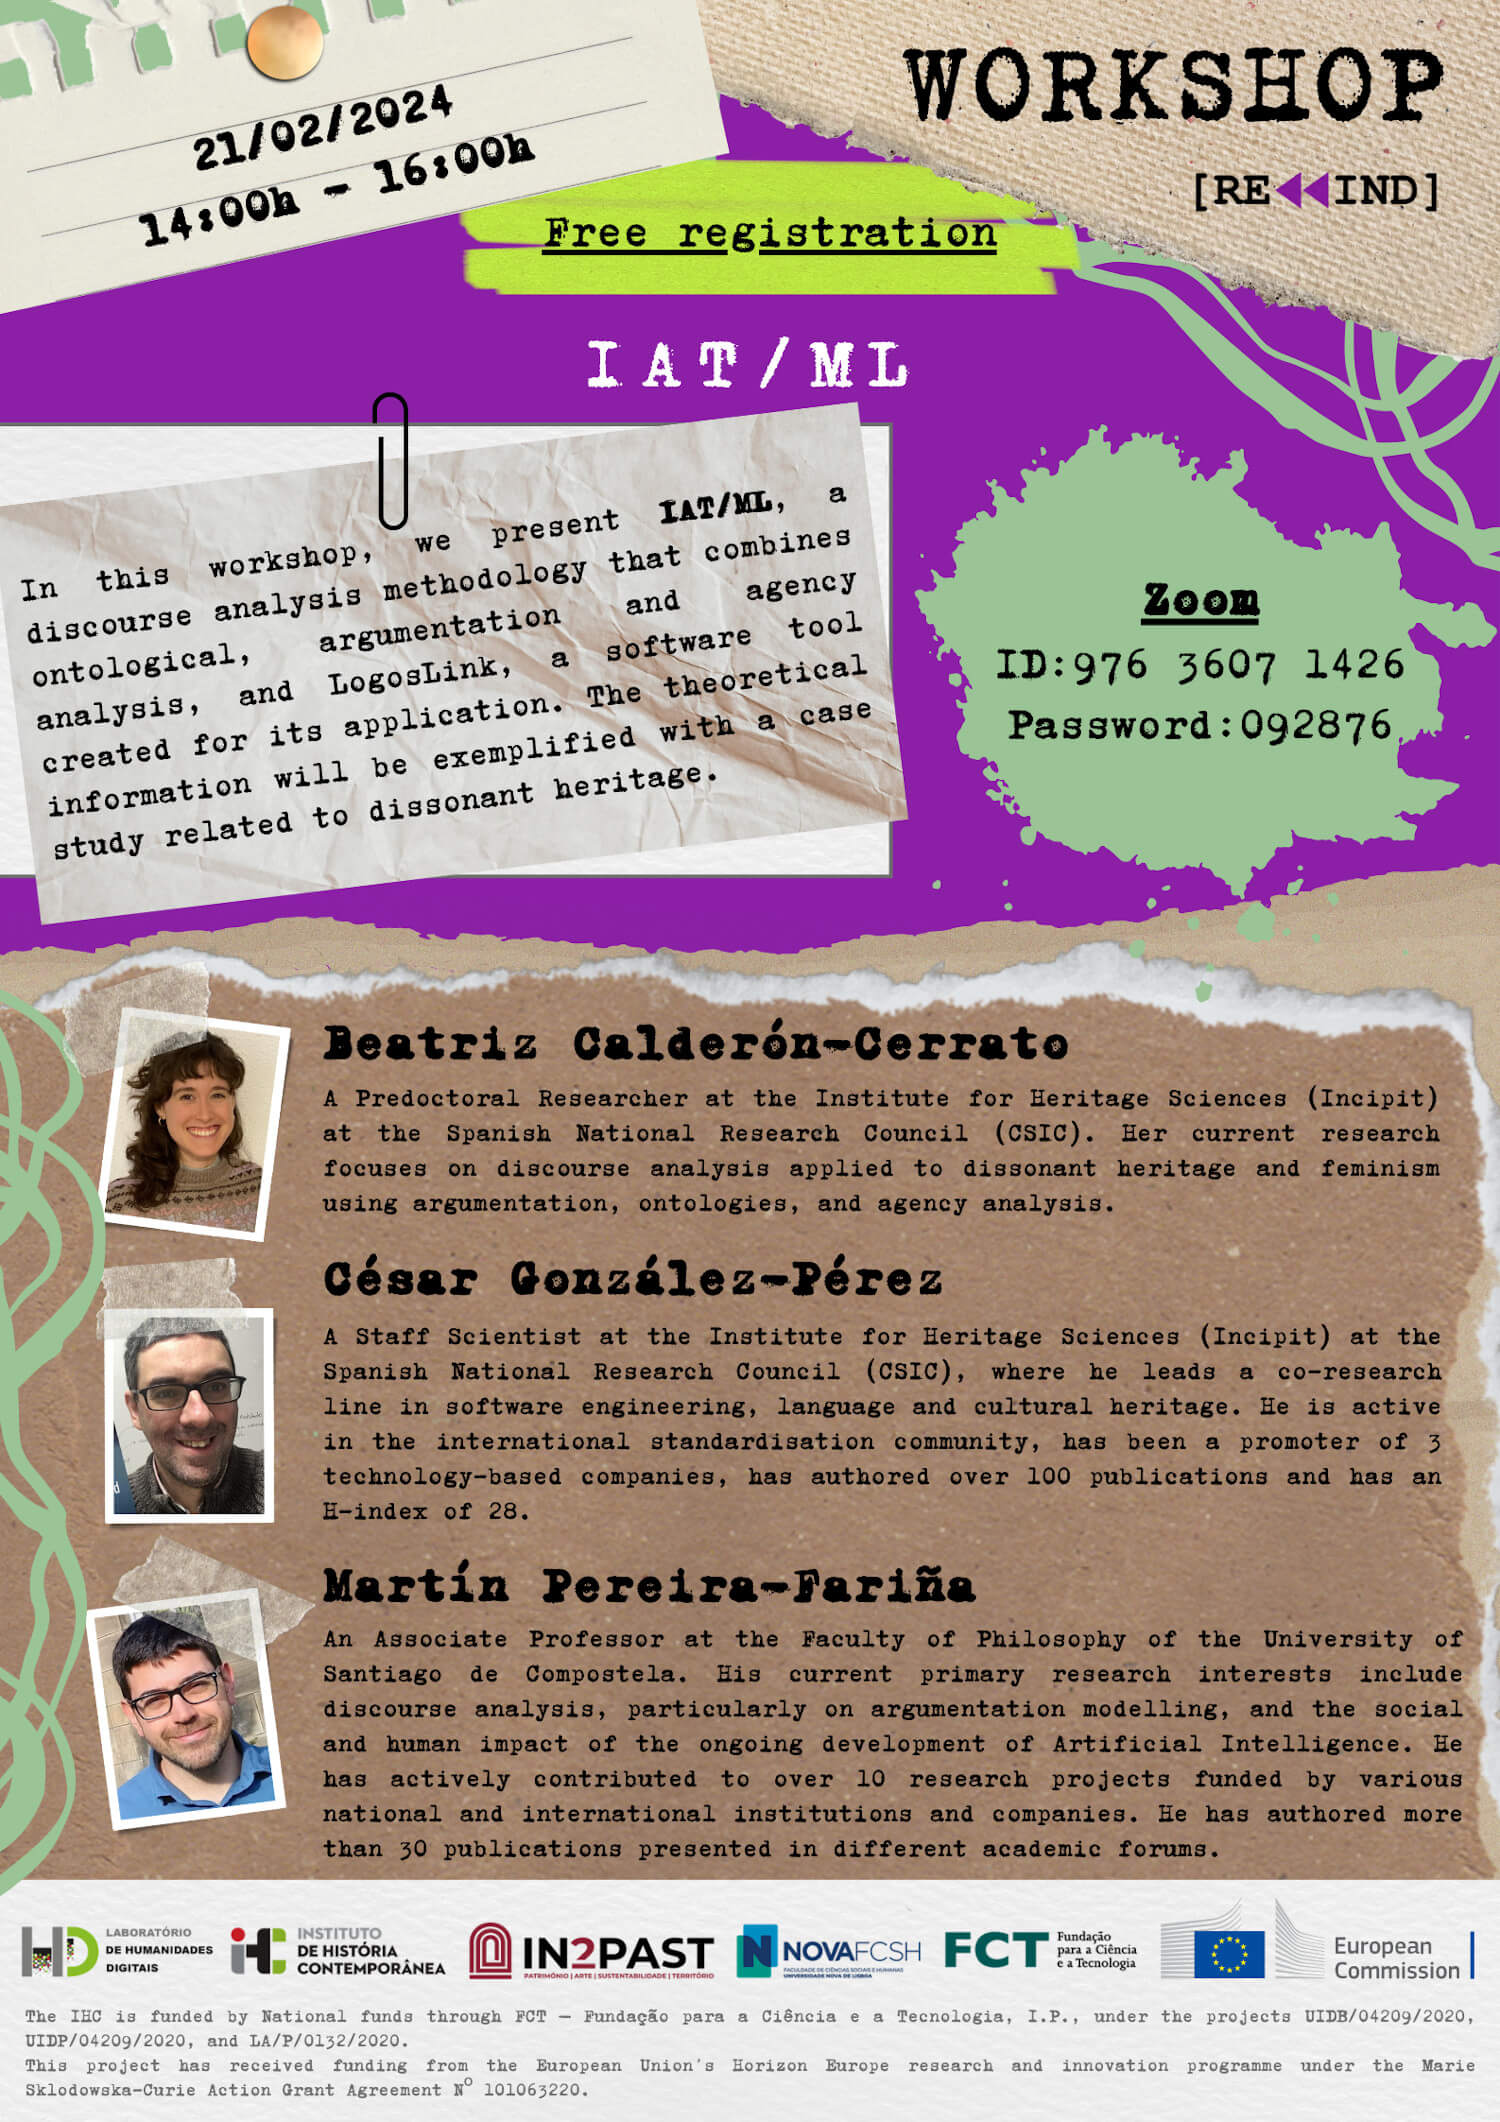 Poster for the Rewind workshop with the title “IAT / ML”. 21 February 2024, from 2 to 4 PM. Free registration. Online, via Zoom. Summary: In this workshop, we present IAT/ML, a discourse analysis methodology that combines ontological, argumentation and agency analysis, and LogosLink, a software tool created for its application. The theoretical information will be exemplified with a case study related to dissonant heritage. Speaker 1: Beatriz Calderón-Cerrato is a predoctoral researcher at the Institute for Heritage Sciences (Incipit) at the Spanish National Research Council (CSIC). Her current research focuses on discourse analysis applied to dissonant heritage and feminism using argumentation, ontologies, and agency analysis. Speaker 2: César González-Pérez is a staff scientist at the Institute for Heritage Sciences (Incipit) at the Spanish National Research Council (CSIC), where he leads a co-research line in software engineering, language, and cultural heritage. He is active in the international standardisation community, has been the promoter of three technology-based companies, has authored over 100 publications, and has an H-index of 28. Speaker 3: Martín Pereira-Fariña is an Associate Professor at the Faculty of Philosophy of the University of Santiago de Compostela. His current primary research interests include discourse analysis, particularly on argumentation modelling, and the social and human impact of the ongoing development of artificial intelligence. He has actively contributed to over ten research projects funded by various national and international institutions and companies. He has authored more than 30 publications presented in different academic fora.